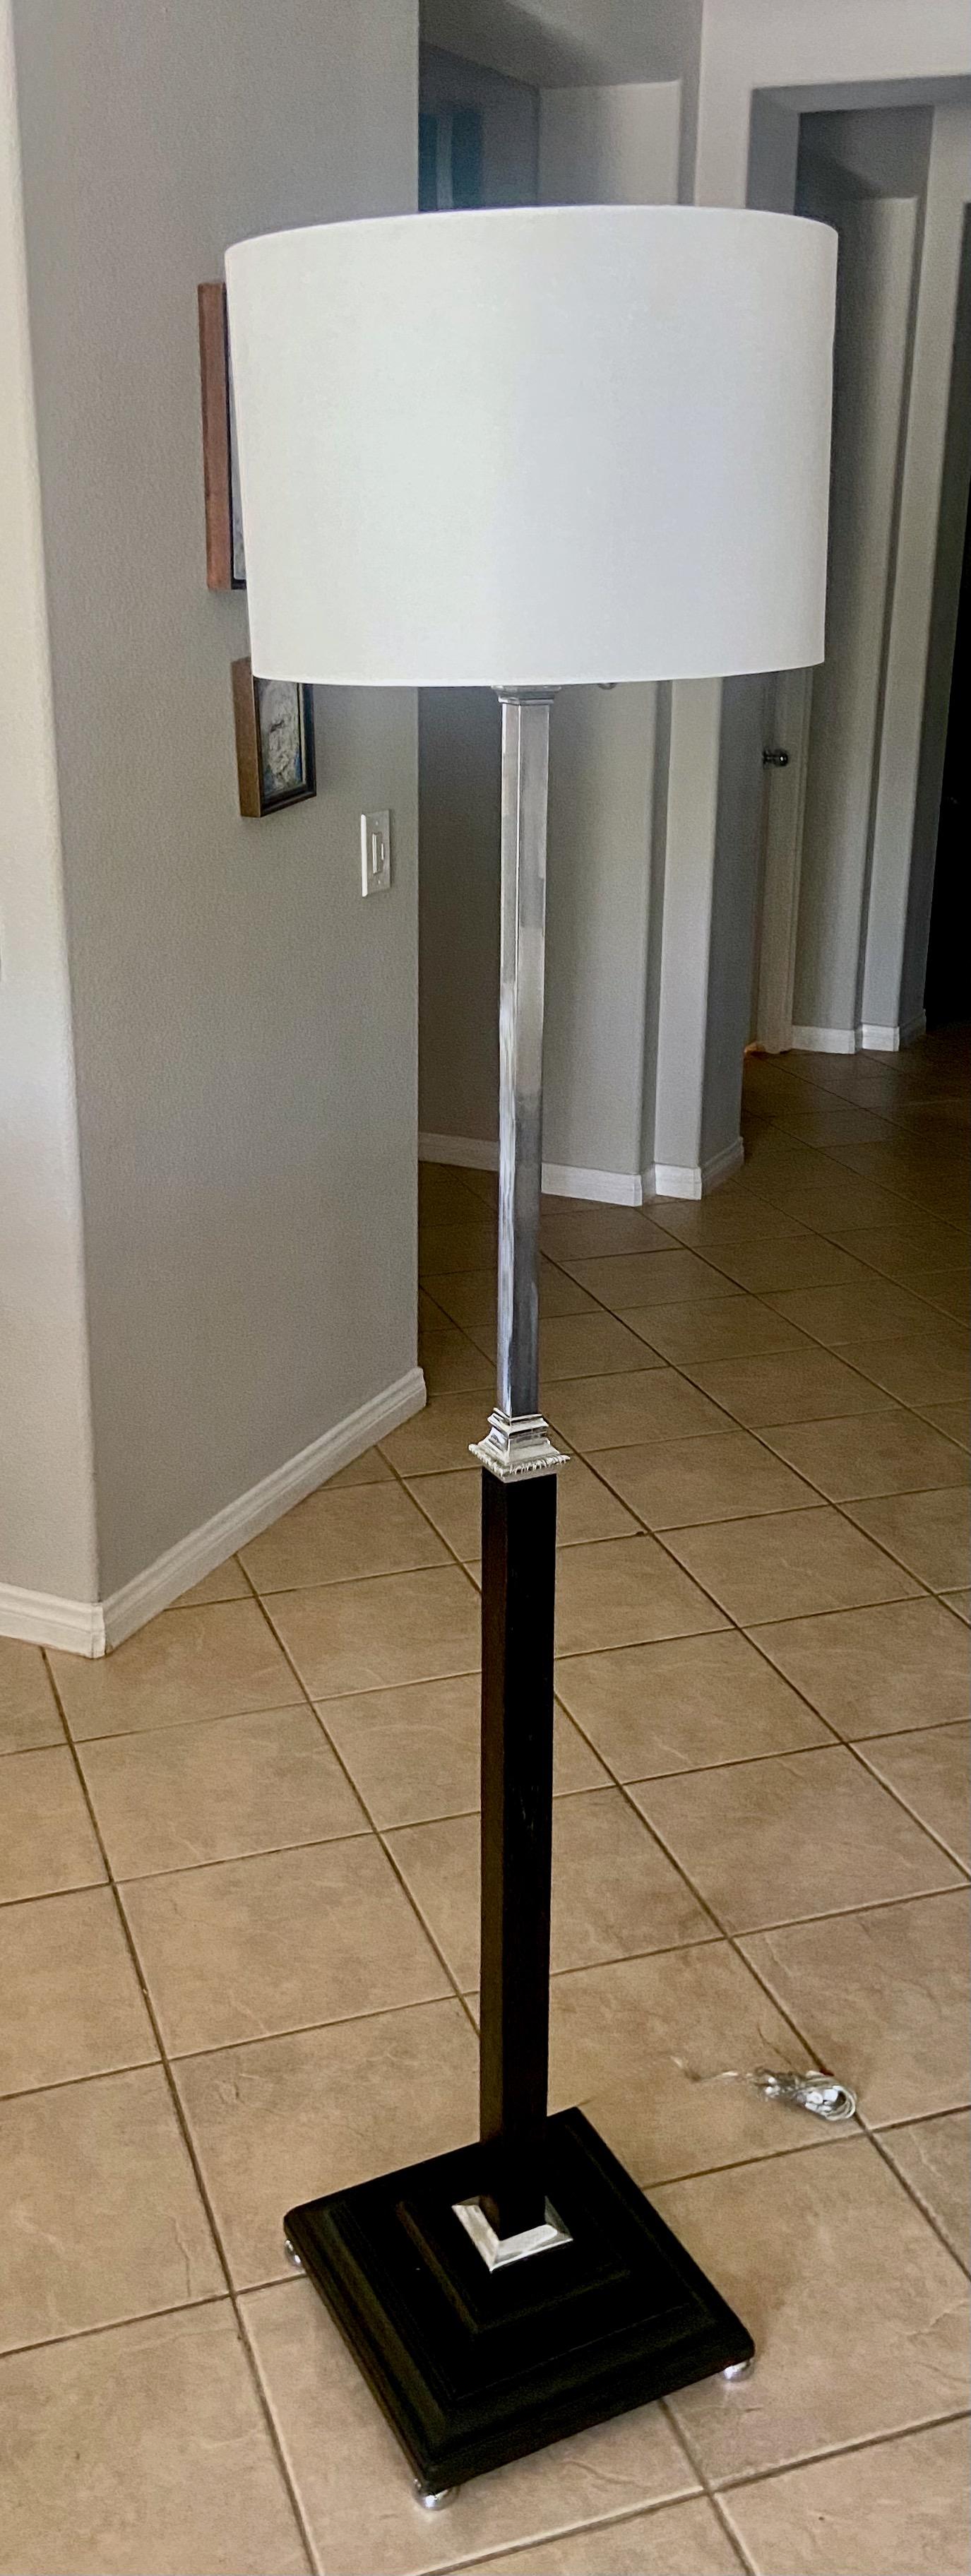 French large-scale moderne wood floor lamp with chrome-plated hardware and double cluster sockets. Newly ebonized lacquered finish in the manner of Parzinger. Newly wired for US. Shade not include and is shown for photography purposes only.